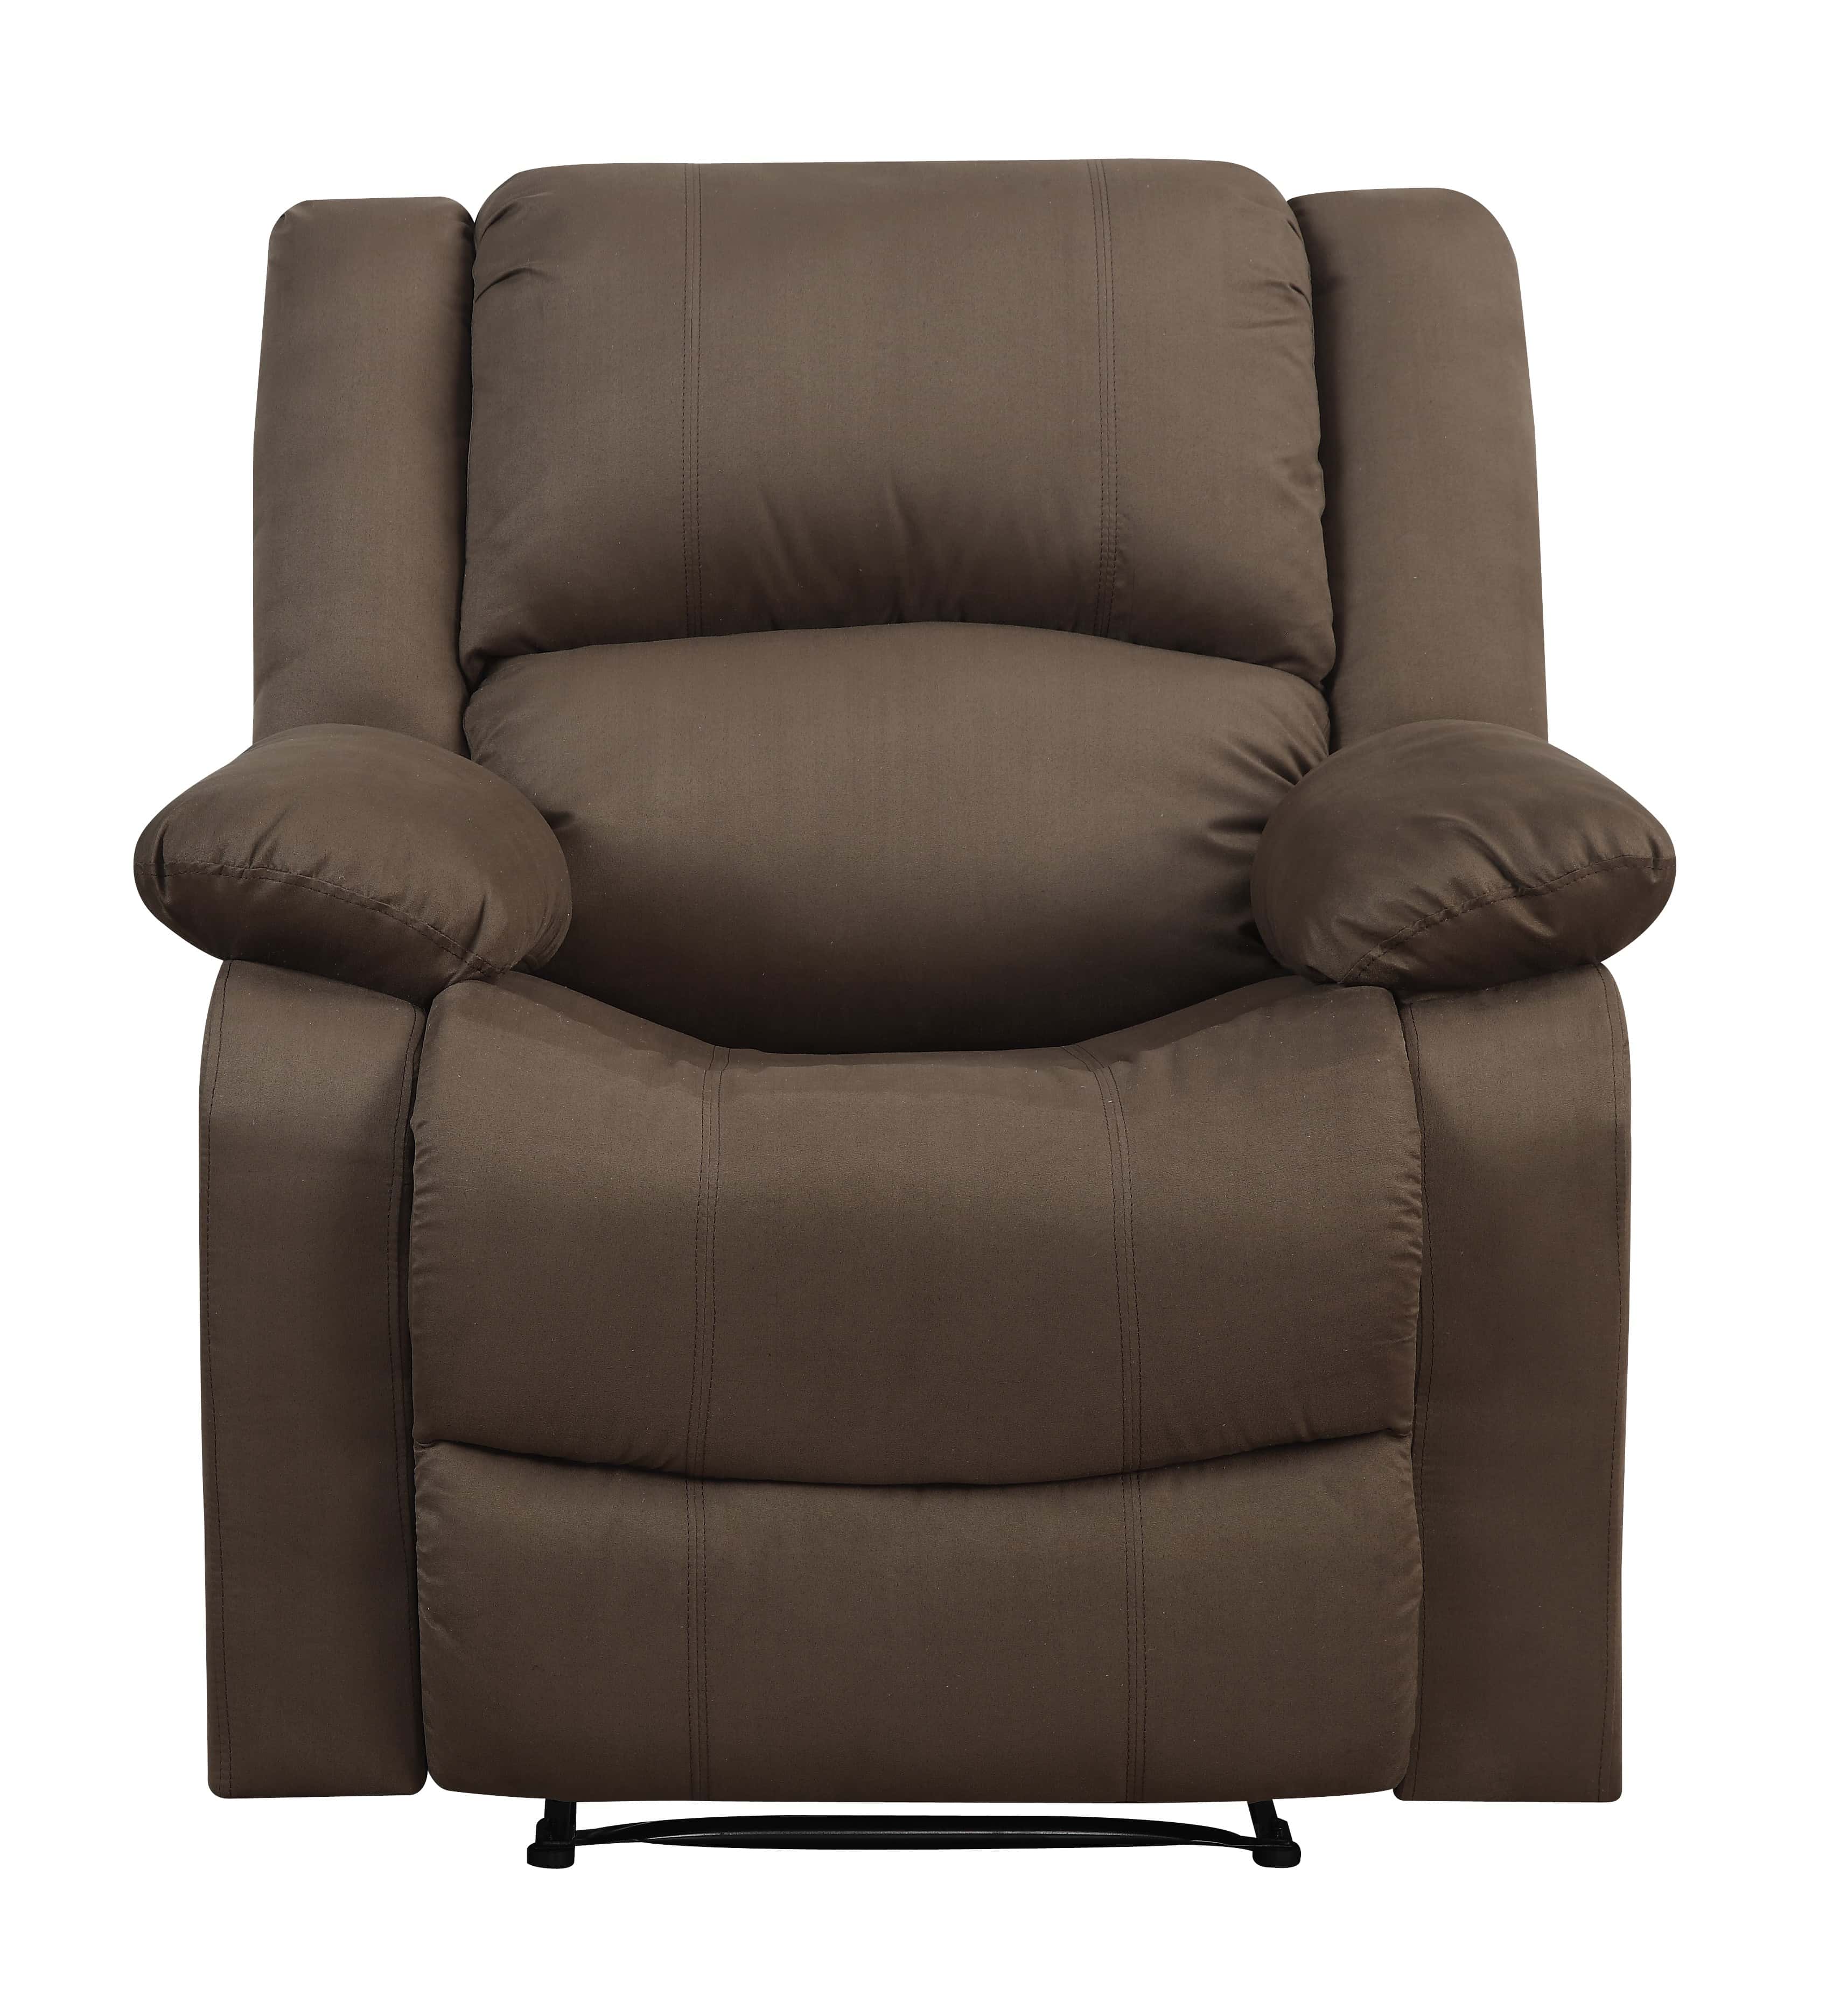 Serta® Parker Chocolate Microfiber Recliner Chair by Lifestyle Solutions